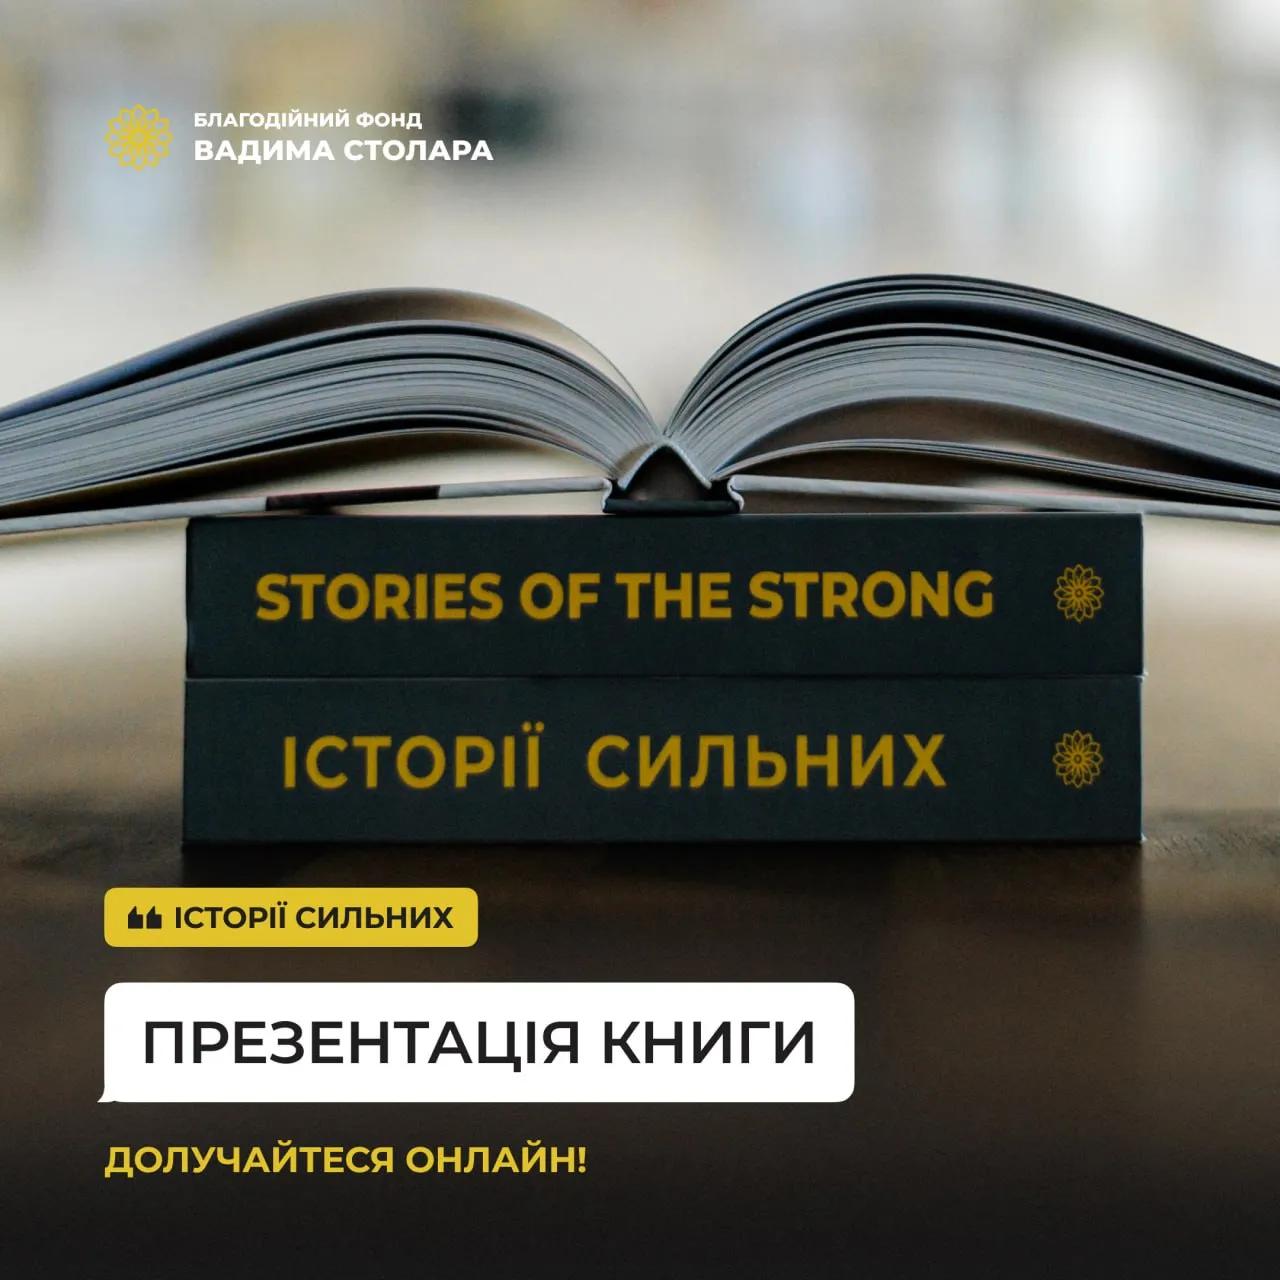 "Stories of the Strong": how the Vadym Stolar Foundation helps preserve and spread the truth about the war in Ukraine